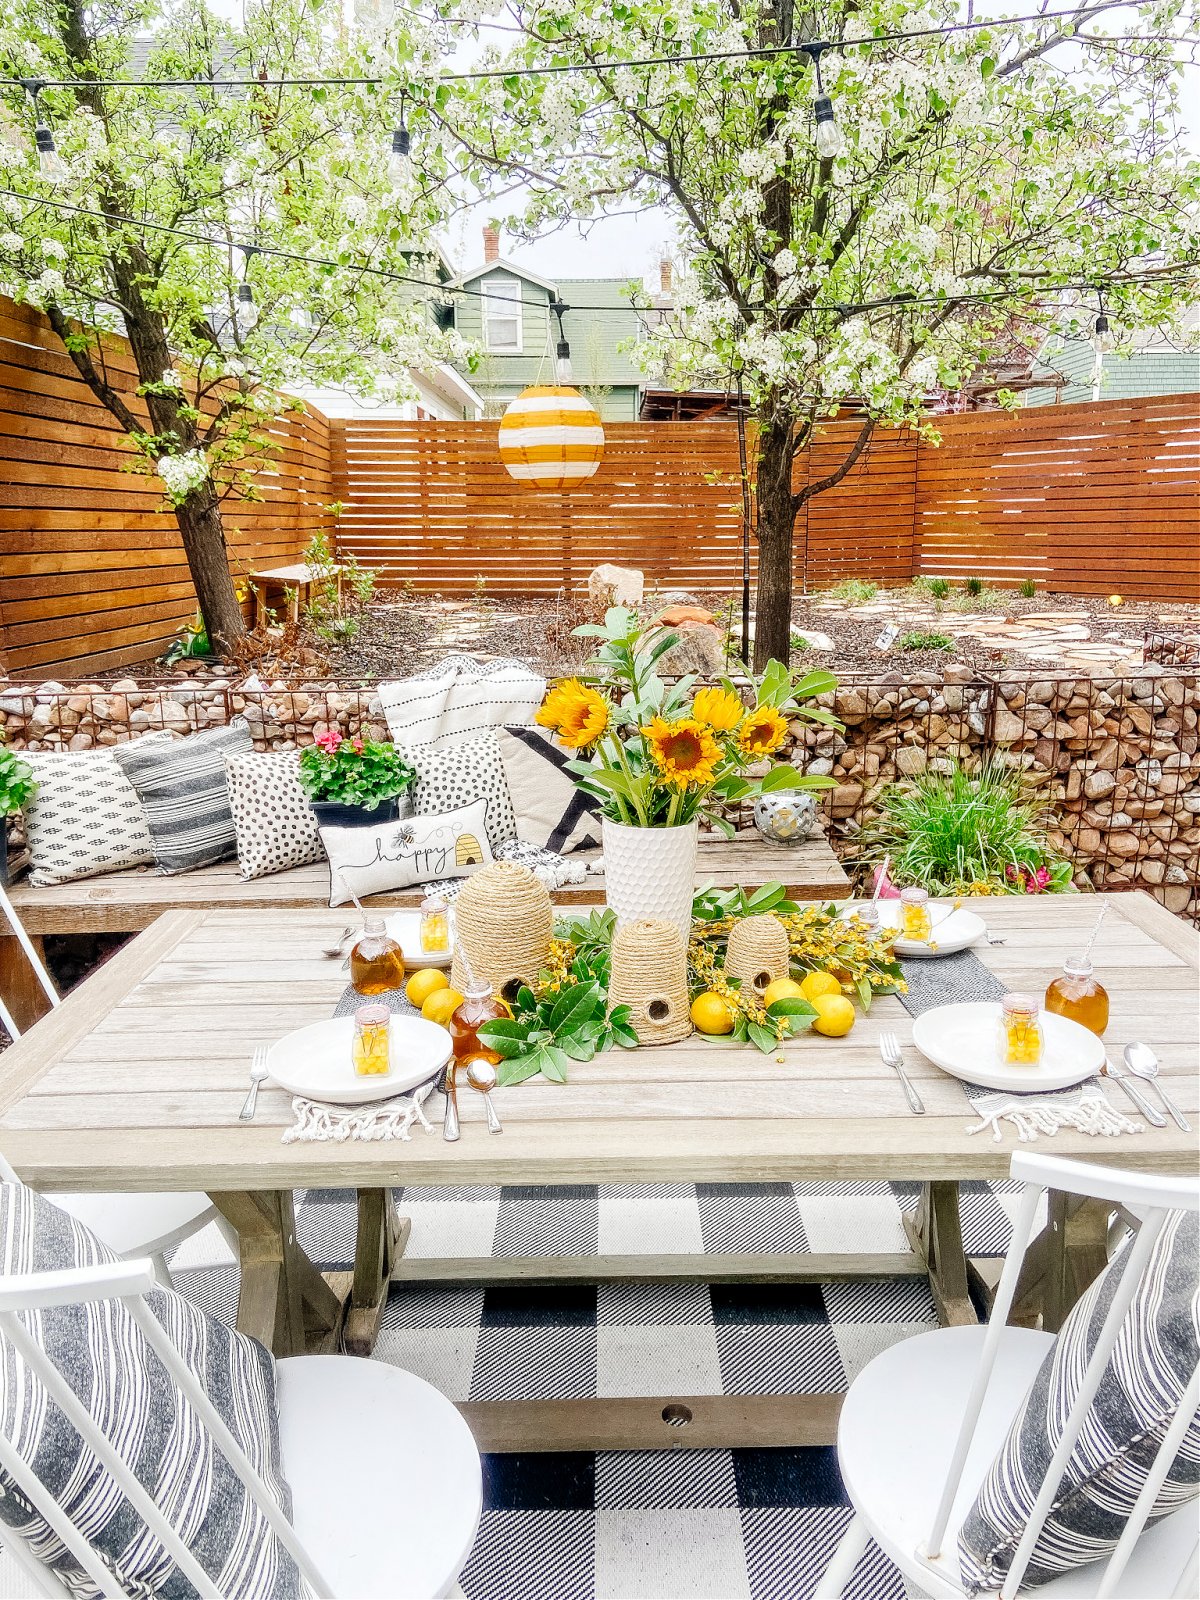 DIY Beehives and Beehive Backyard Inspo! Create cute and inexpensive beehives, add beehive pillows and create a hanging basket garden for a beautiful summer patio!